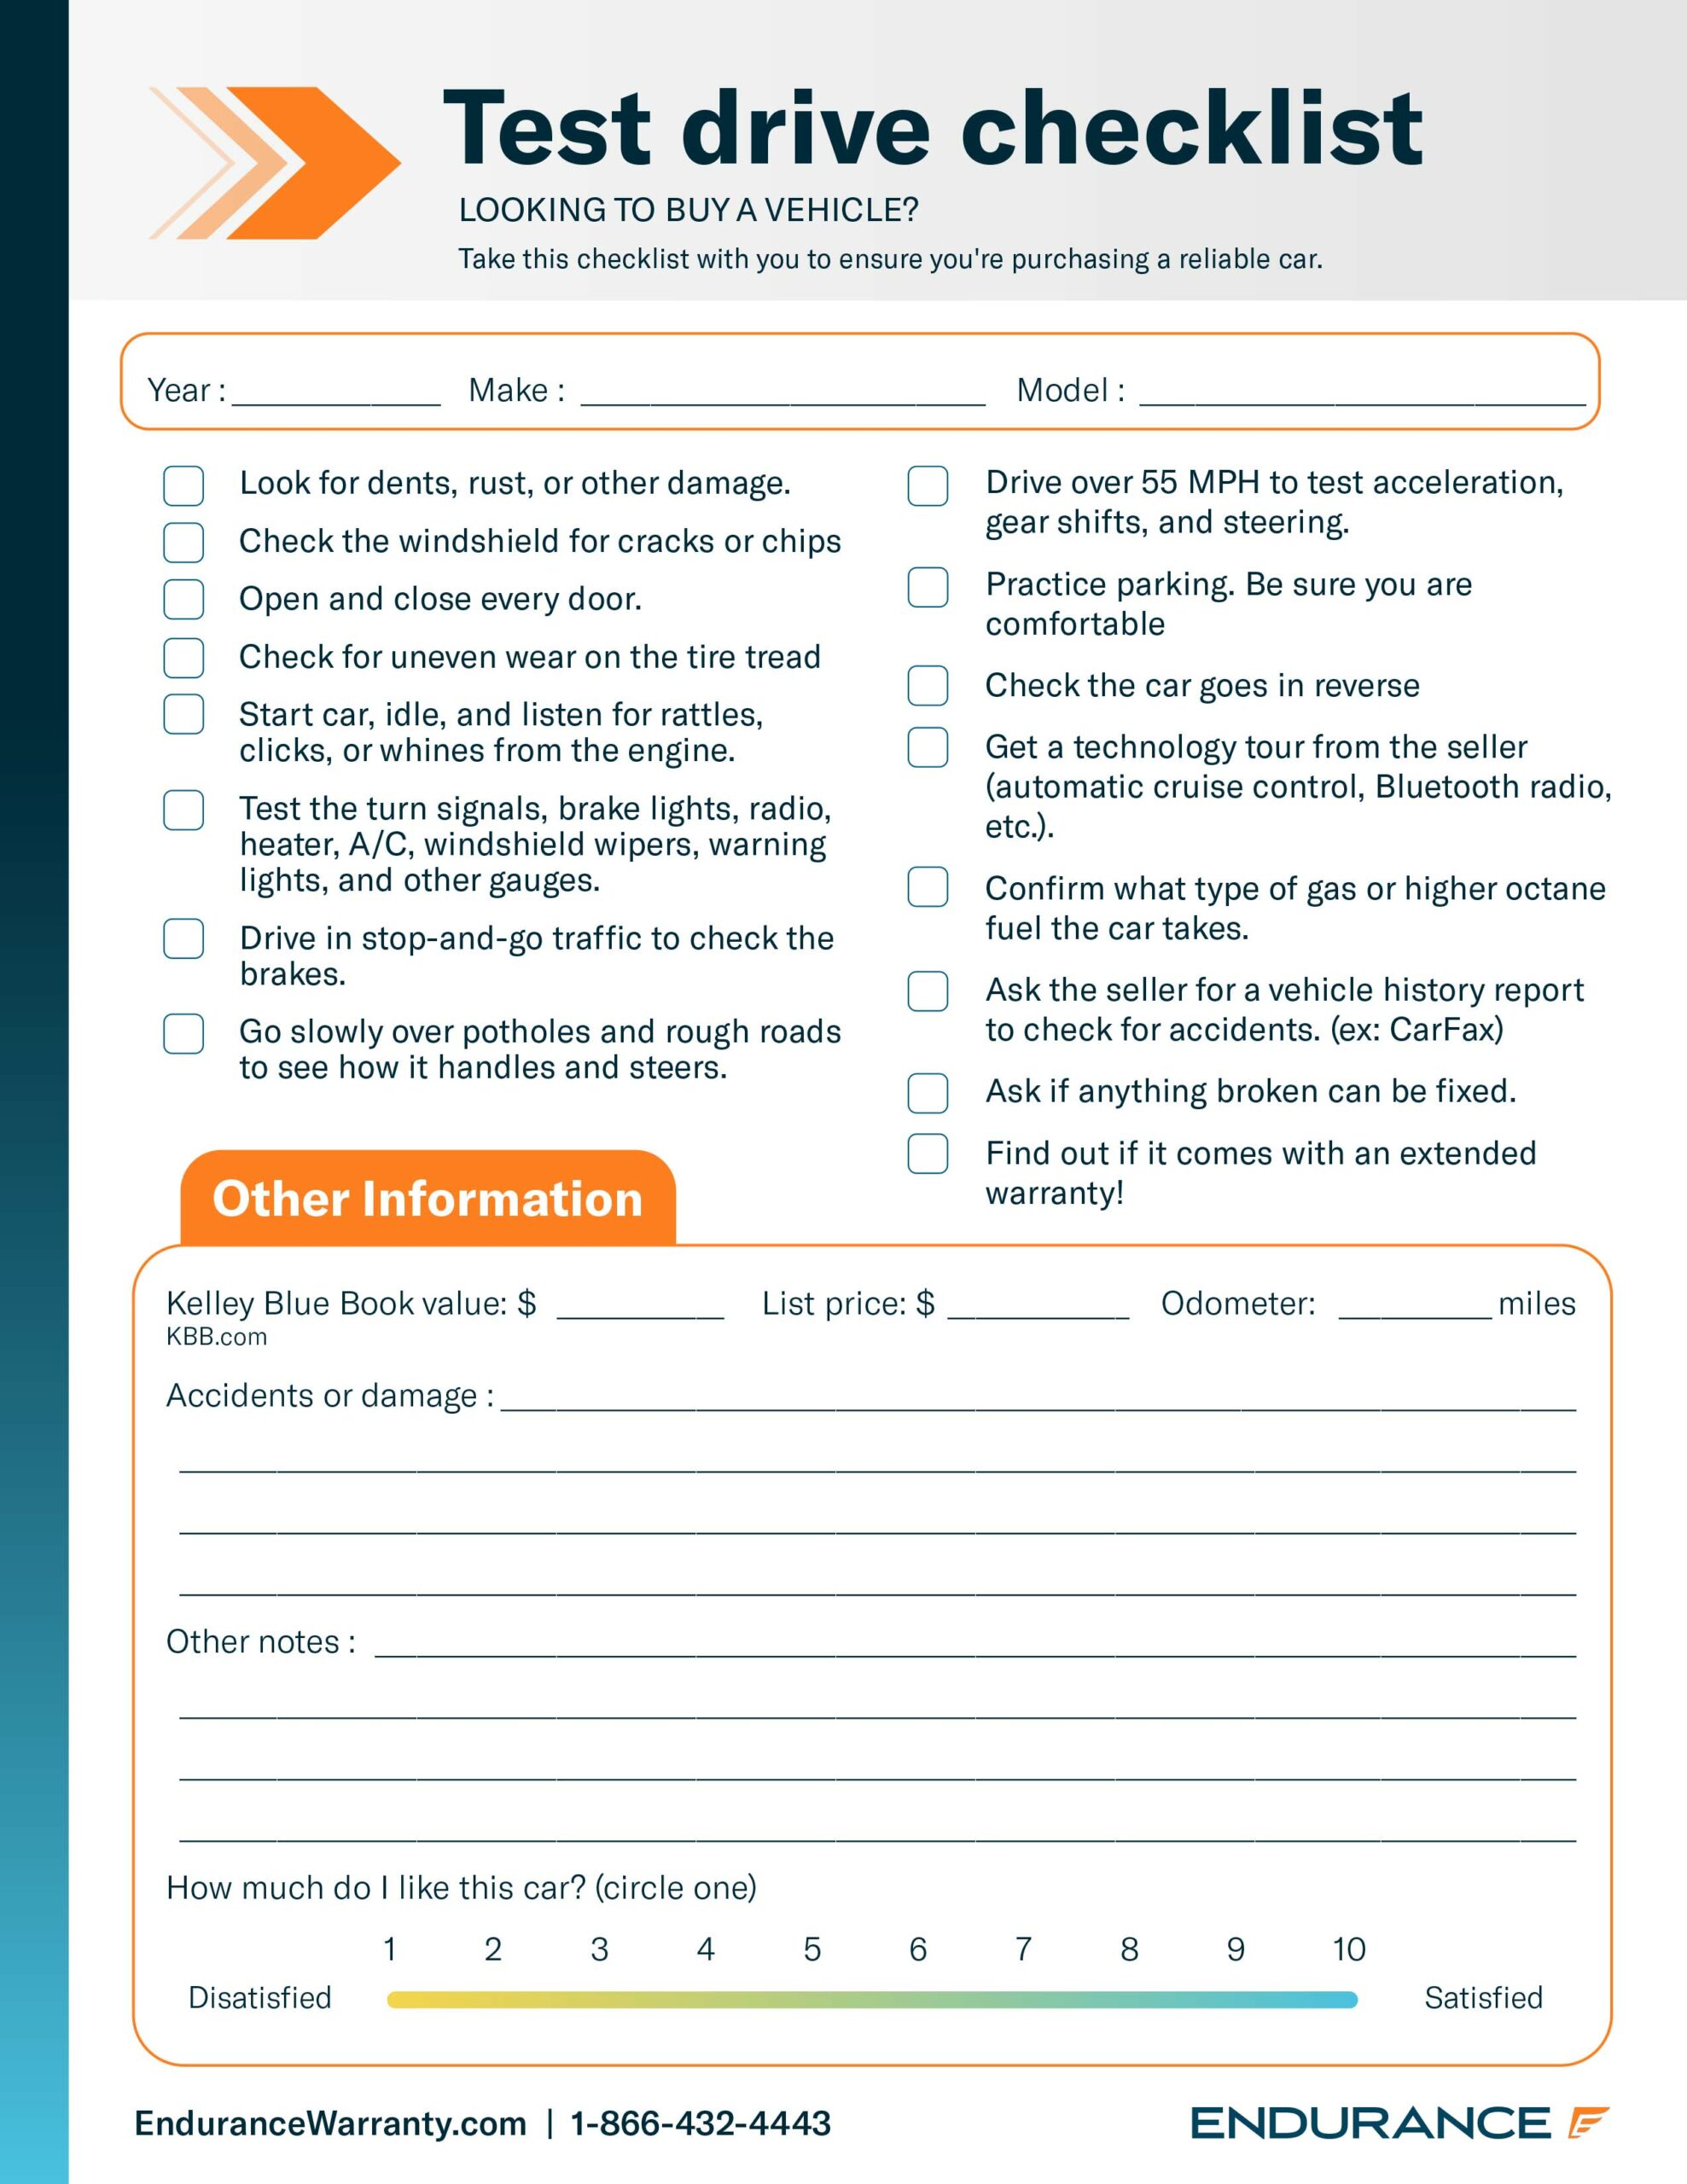 A colored version of a downloadable checklist from Endurance warranty to help you make the most of test driving a potentially new vehicle.